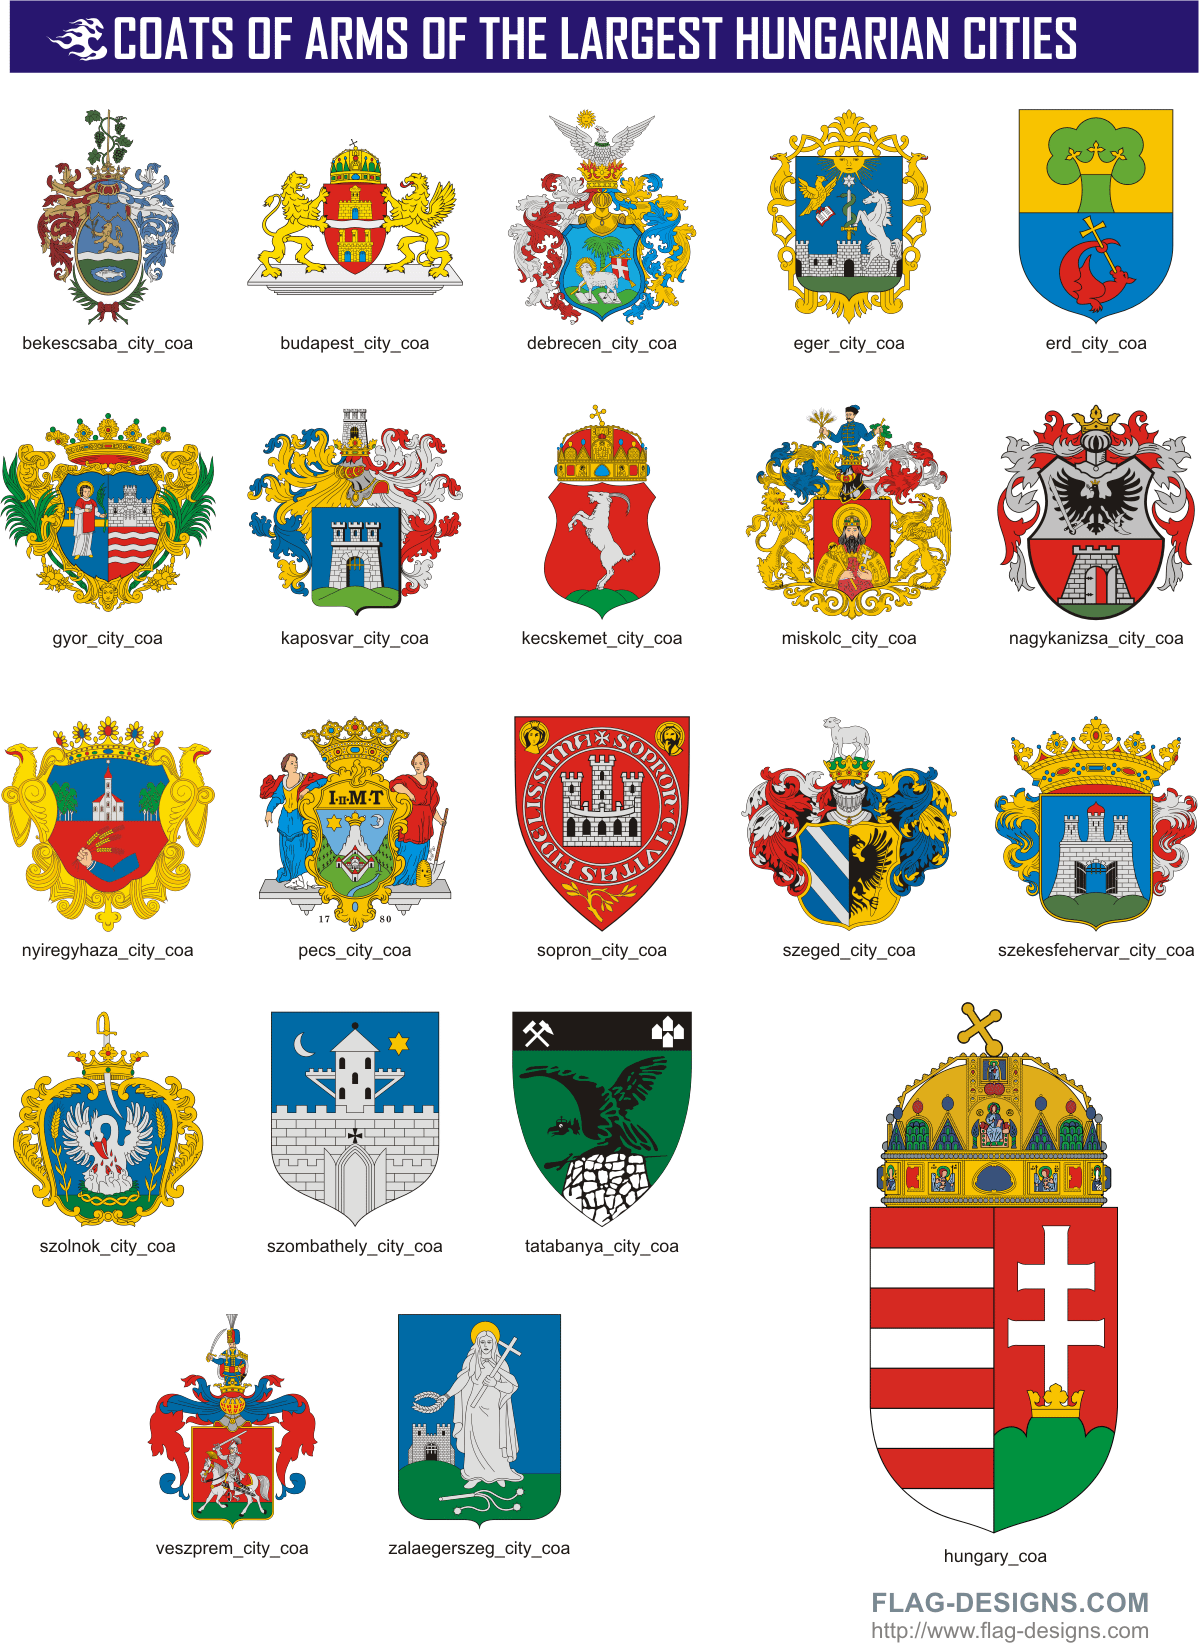 Hungarian Largest City Coats of Arms.